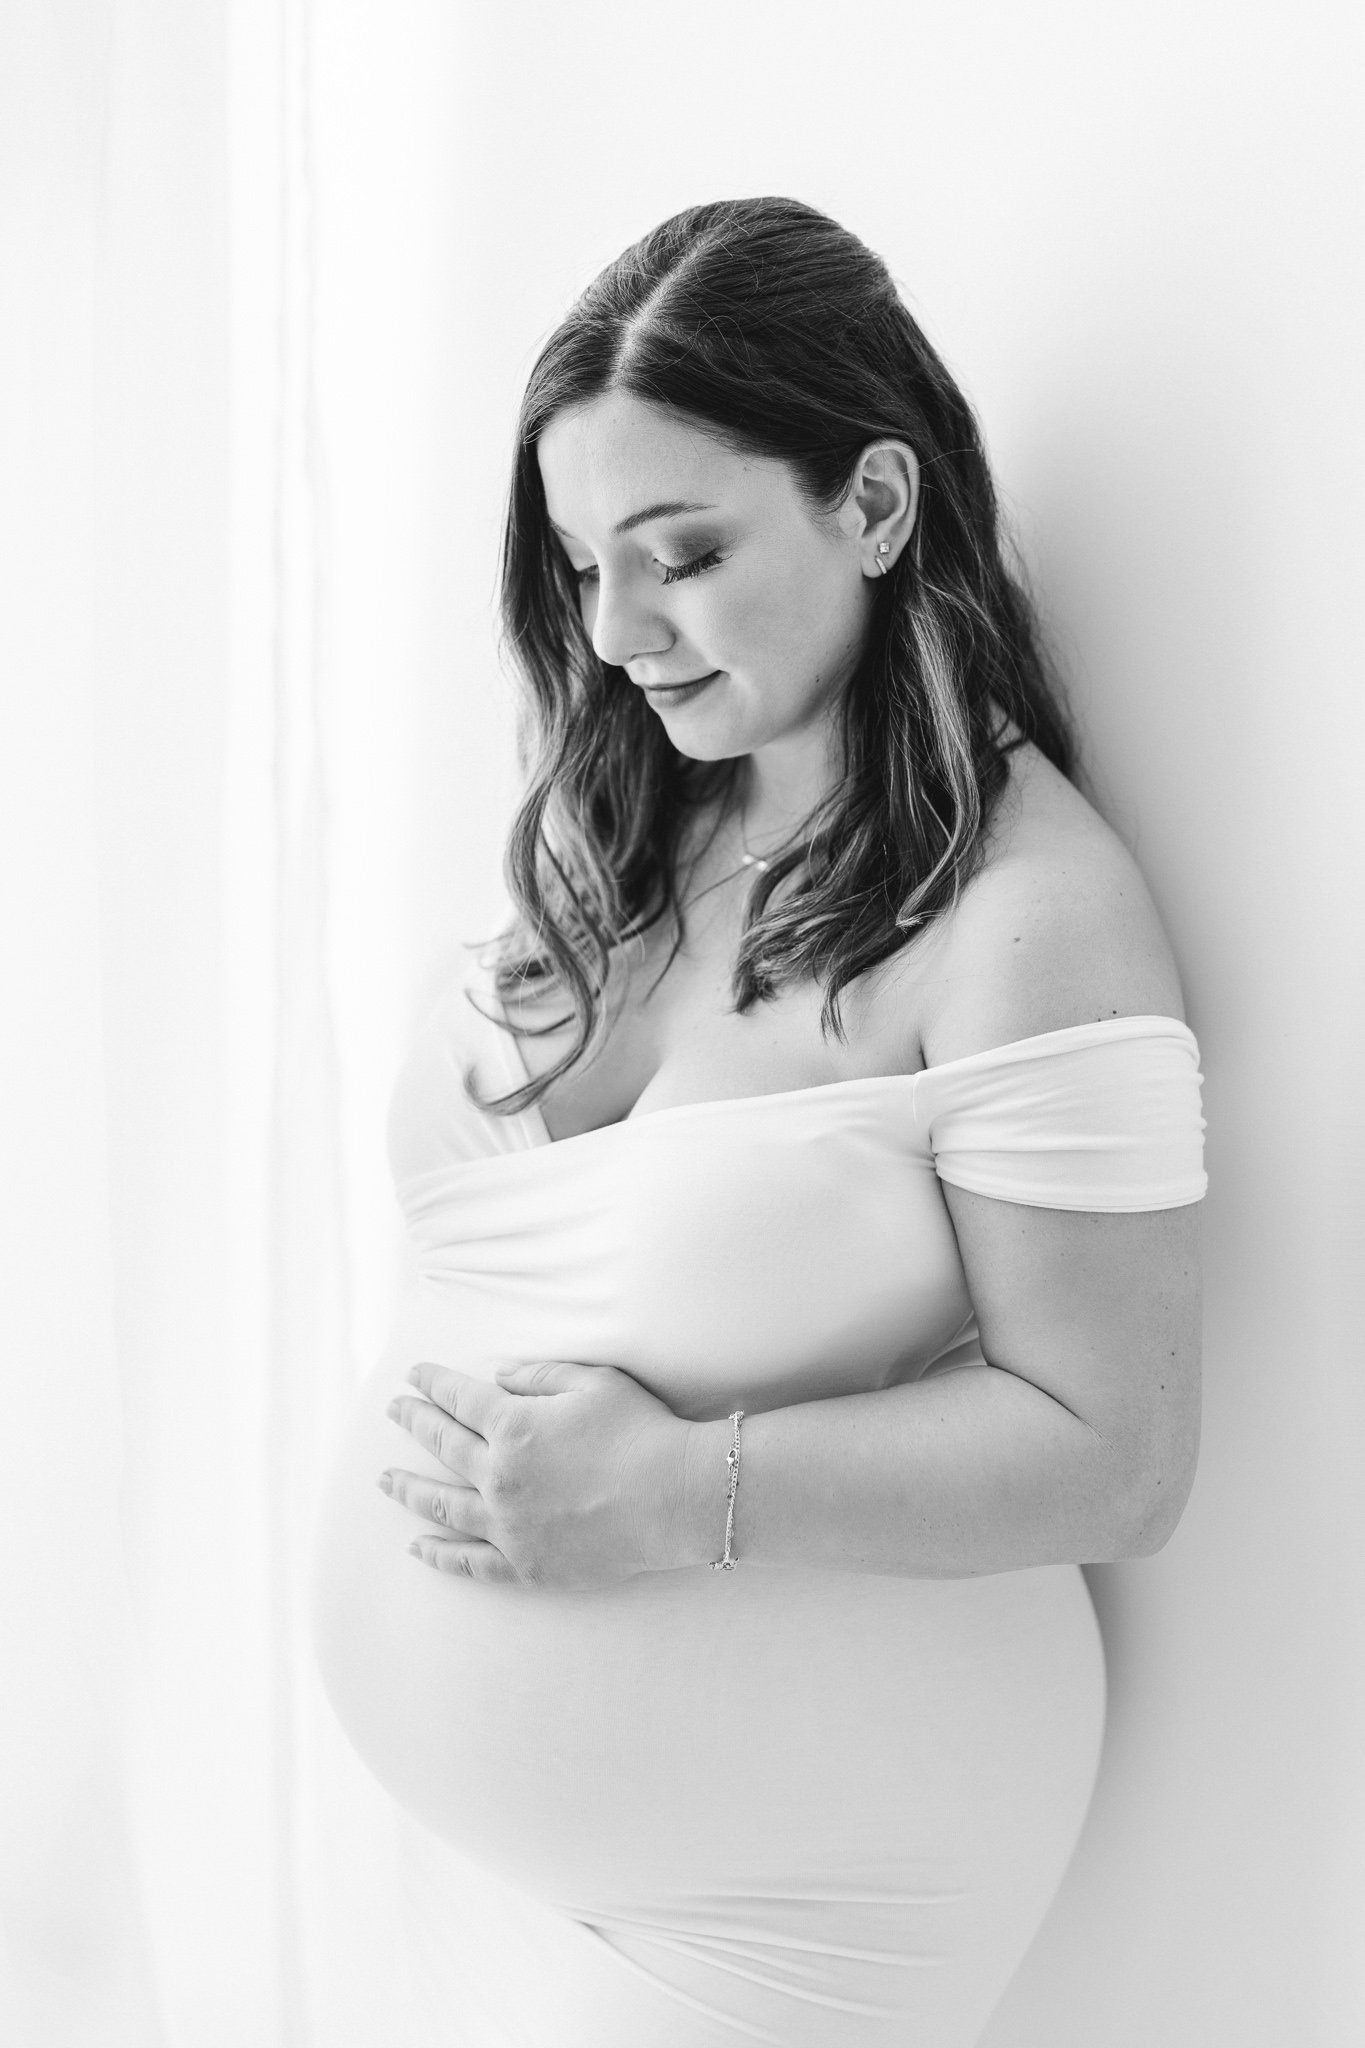  New Jersey Maternity photographer Nicole Hawkins Photography captures a modern studio portrait of a woman in her third trimester. thrid trimester white dress #NicoleHawkinsPhotography #NicoleHawkinsMaternity #Babyontheway #studiomaternityNJ #whitest